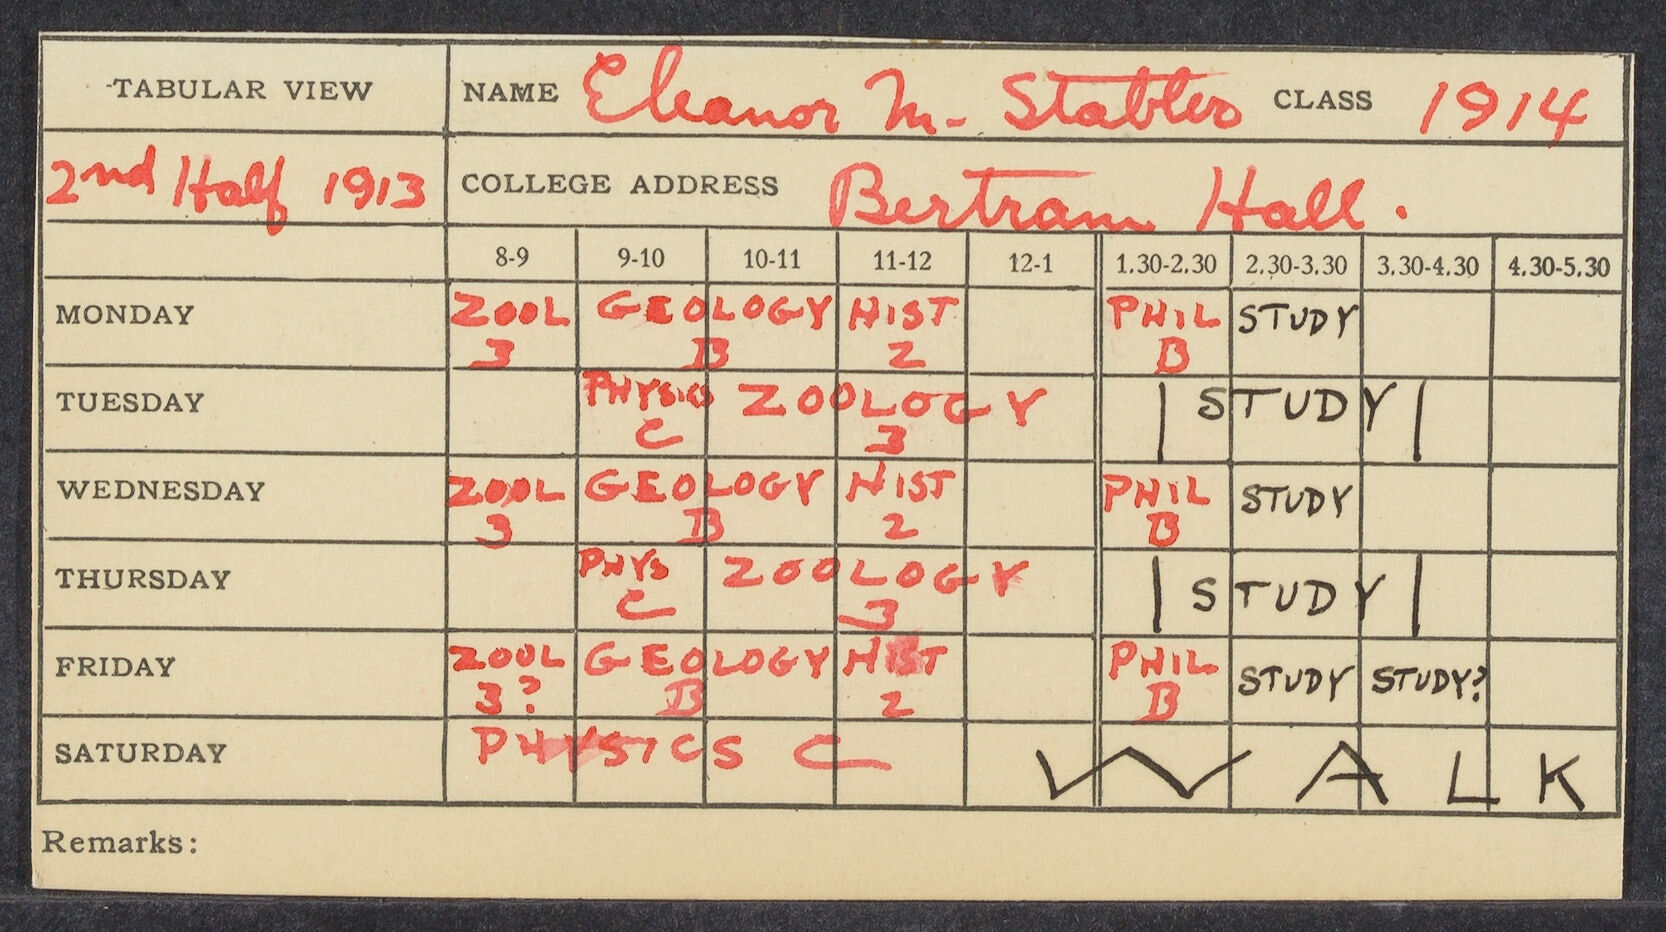 Eleanor Stabler Brooks's grades and note from her Uncle Howard Parker, professor of Zoology, 1914